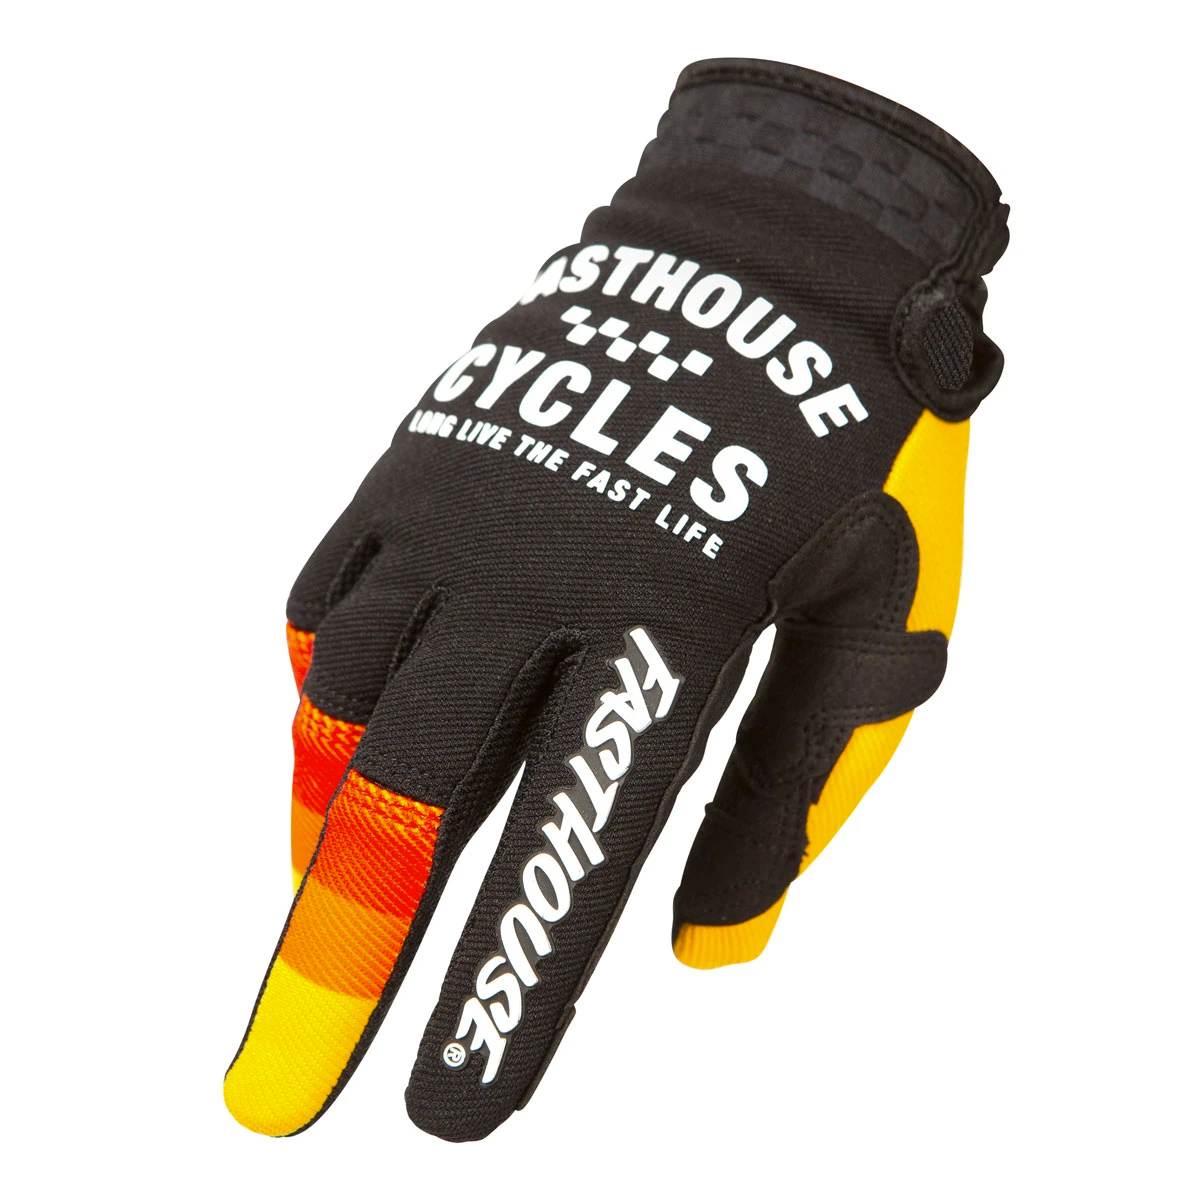 Fasthouse | Pacer Youth Gloves Men's | Size Small in Black/Yellow